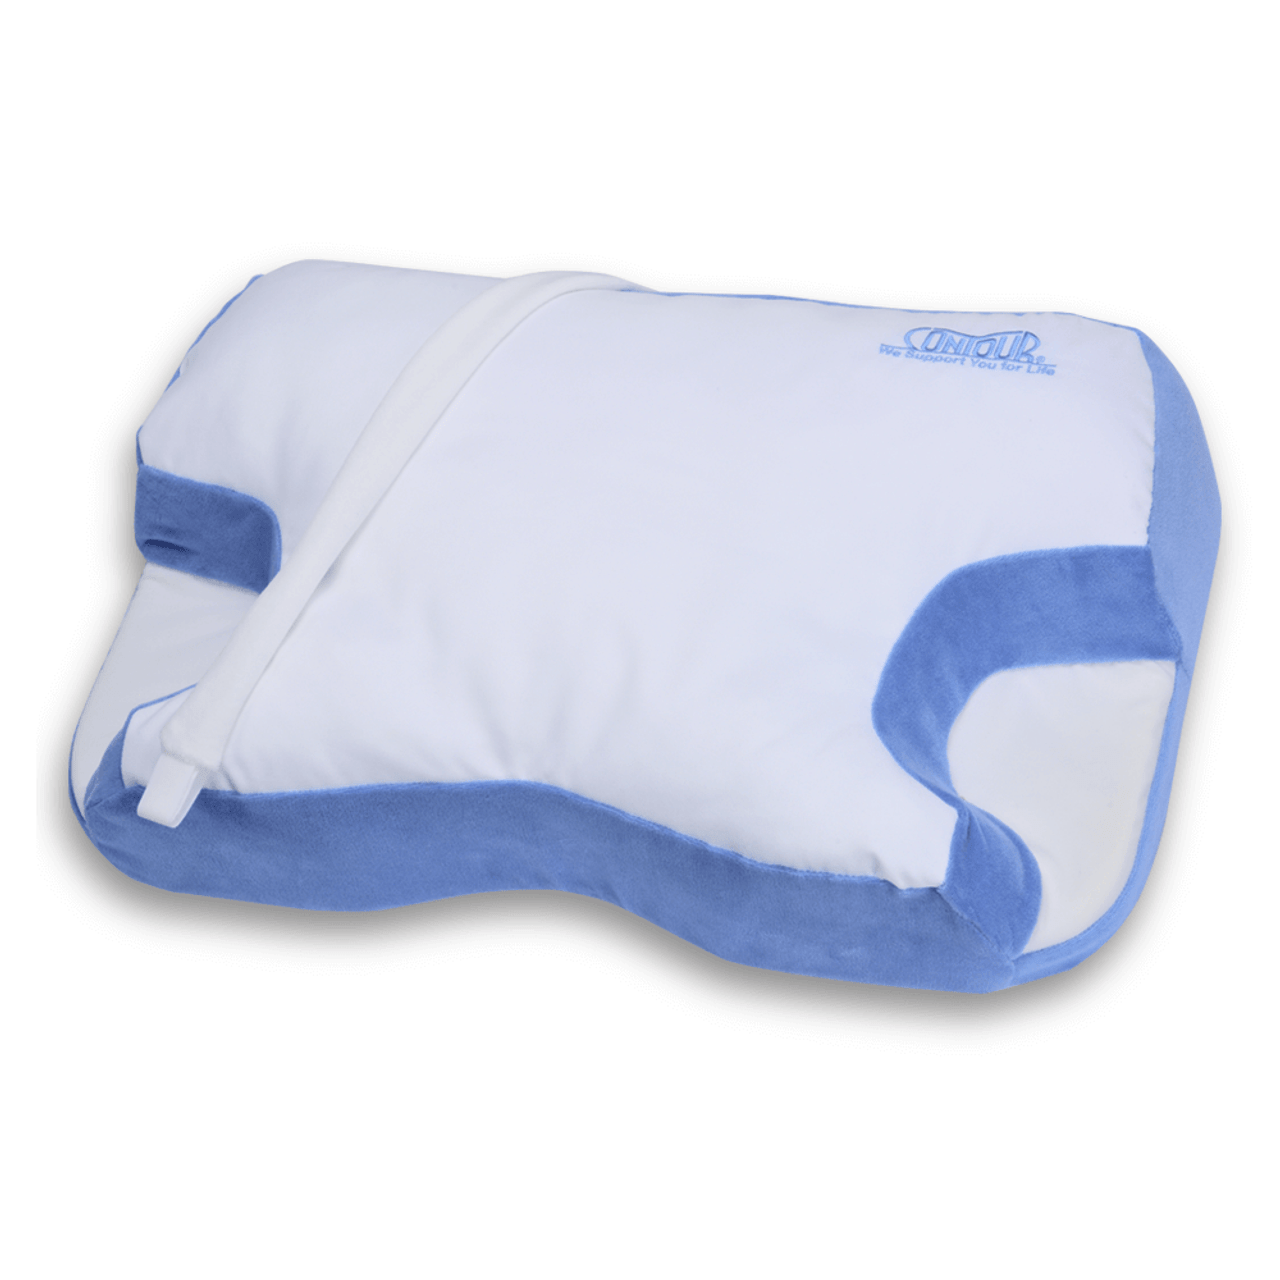 CPAP Pillow for Sleep Apnea and Improved CPAP Therapy for Compliance